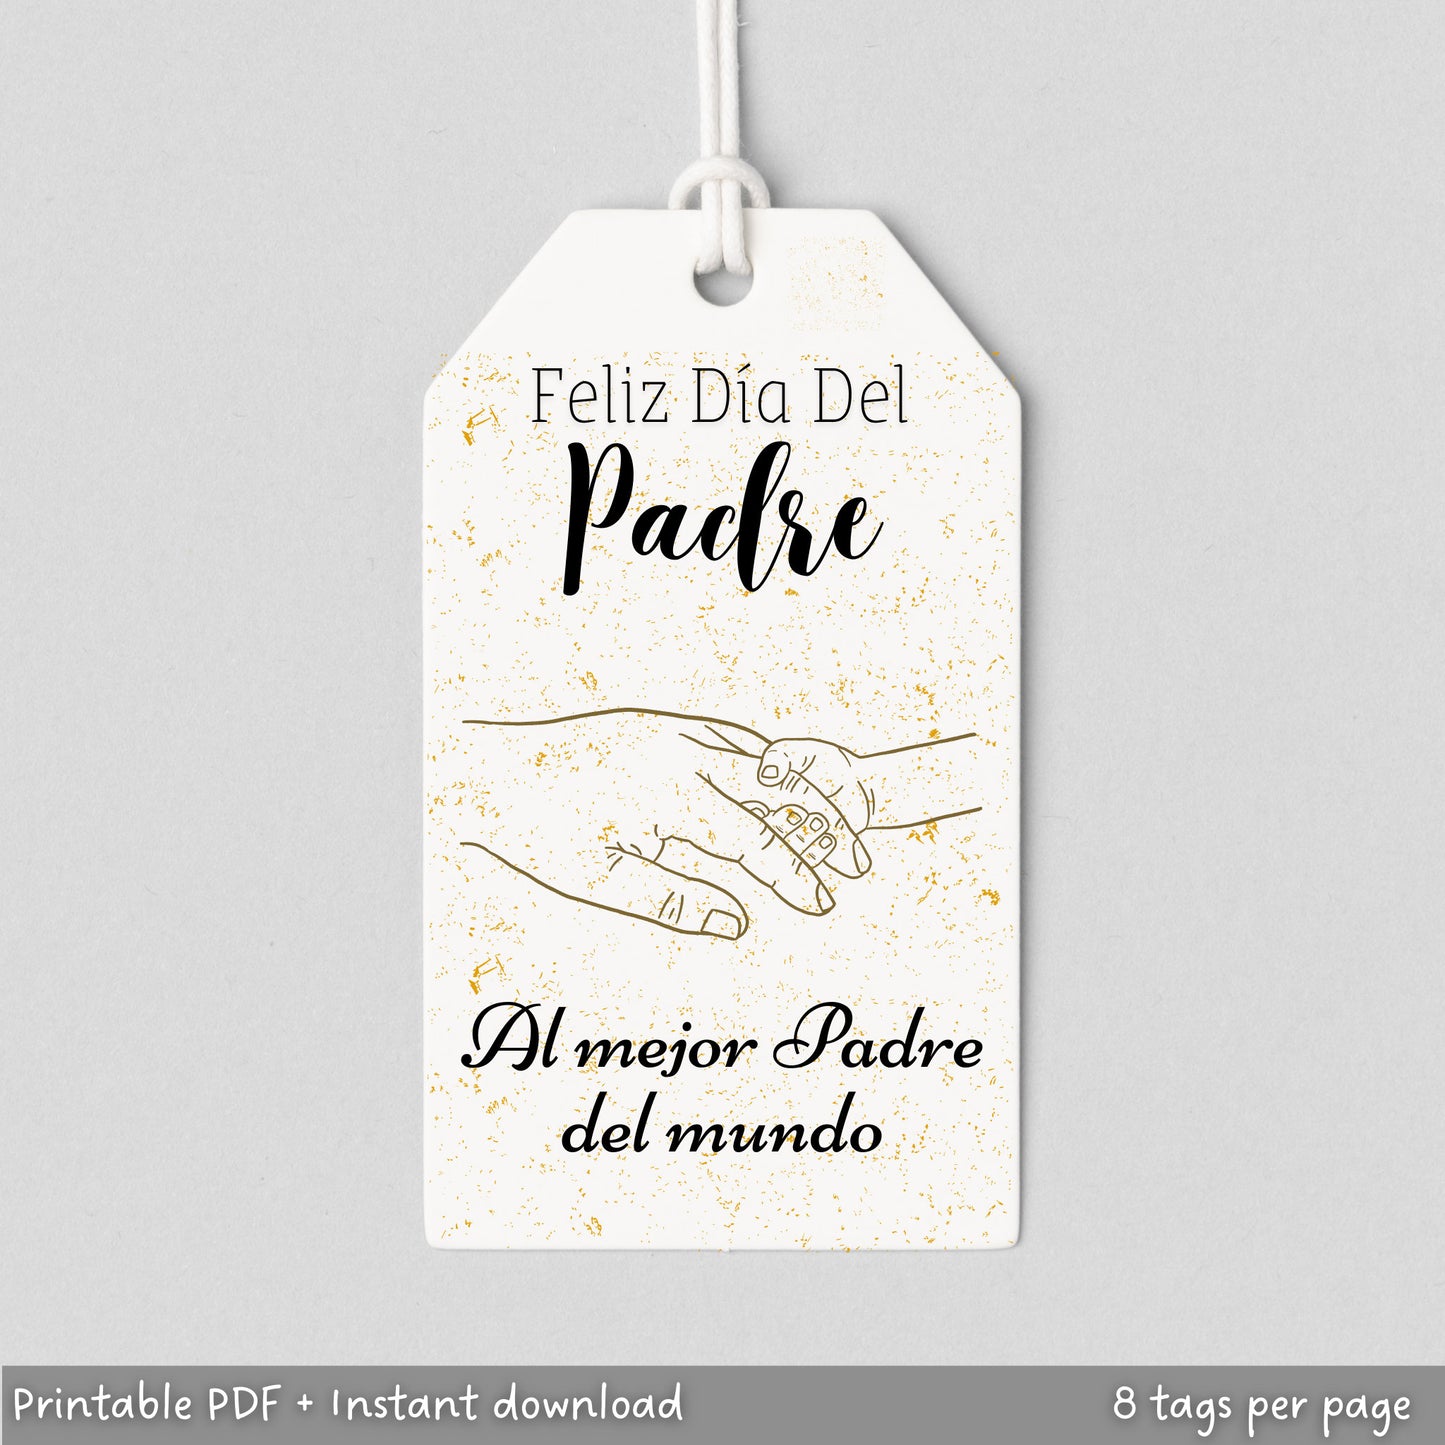 These Spanish Feliz Dia Del Padre Fathers Day Gift Tags are an instant digital download! Simply download, print, use a hole punch to put a ribbon in and gift away! These add a perfect finishing touch to your special and thoughtful gift for dad!